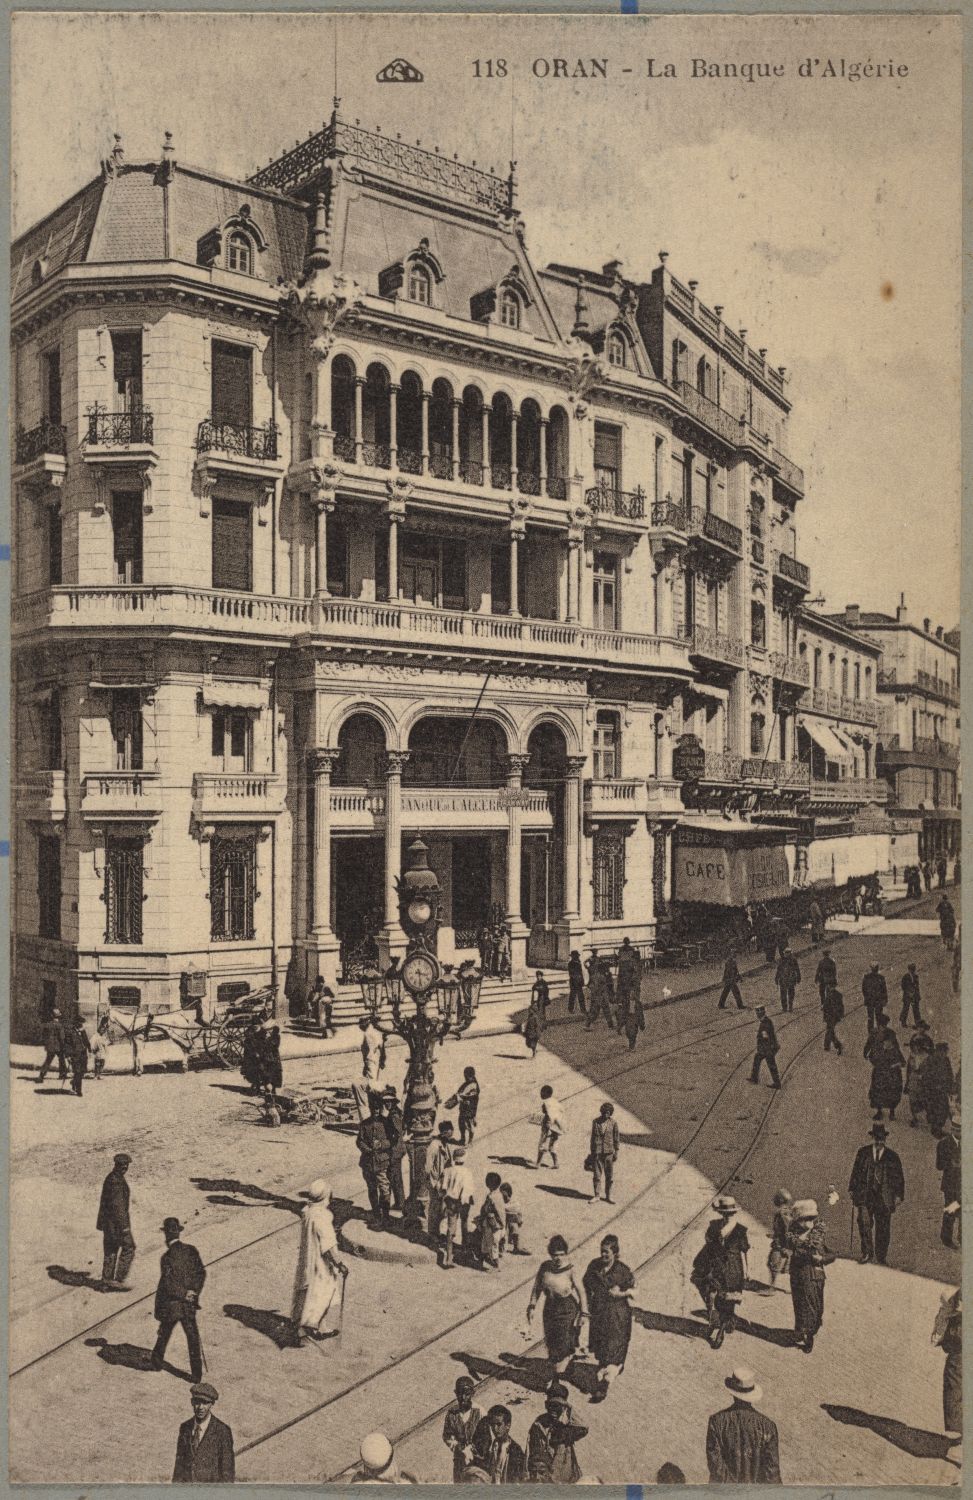 Banque d'Algérie - View of the façade from the square.